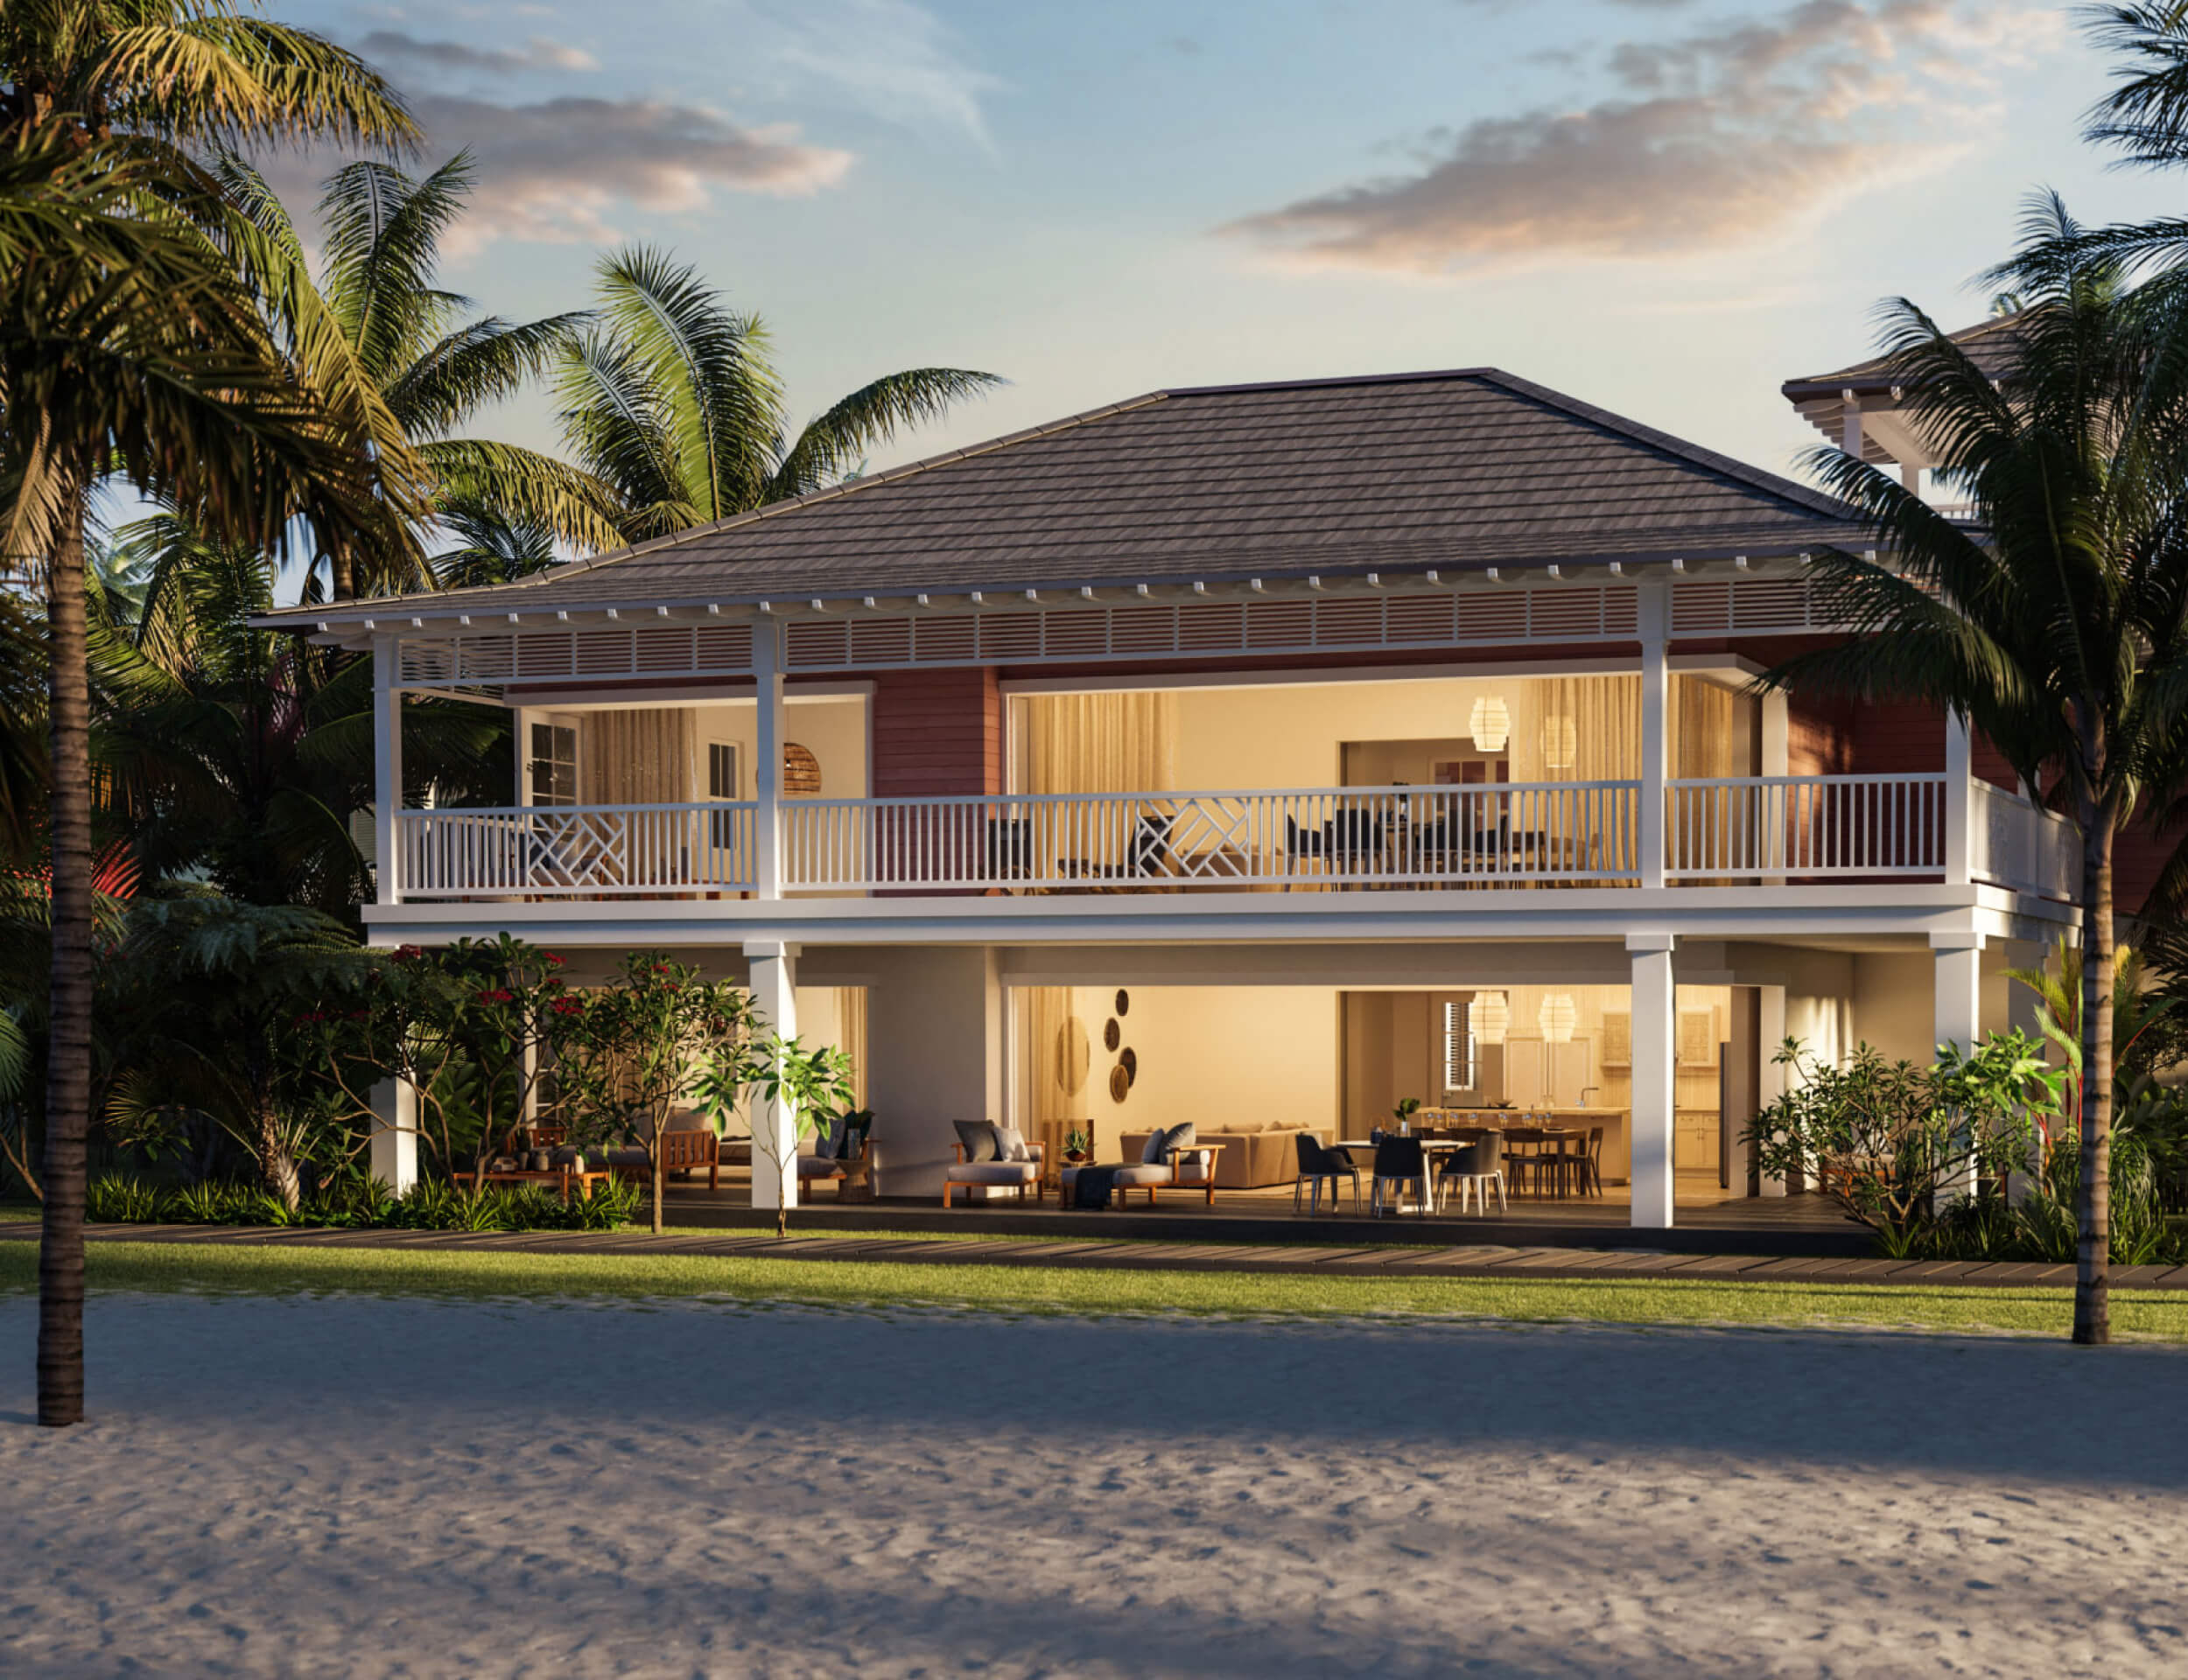 Image of a two-story beachfront house at The Abaco Club, with balconies.